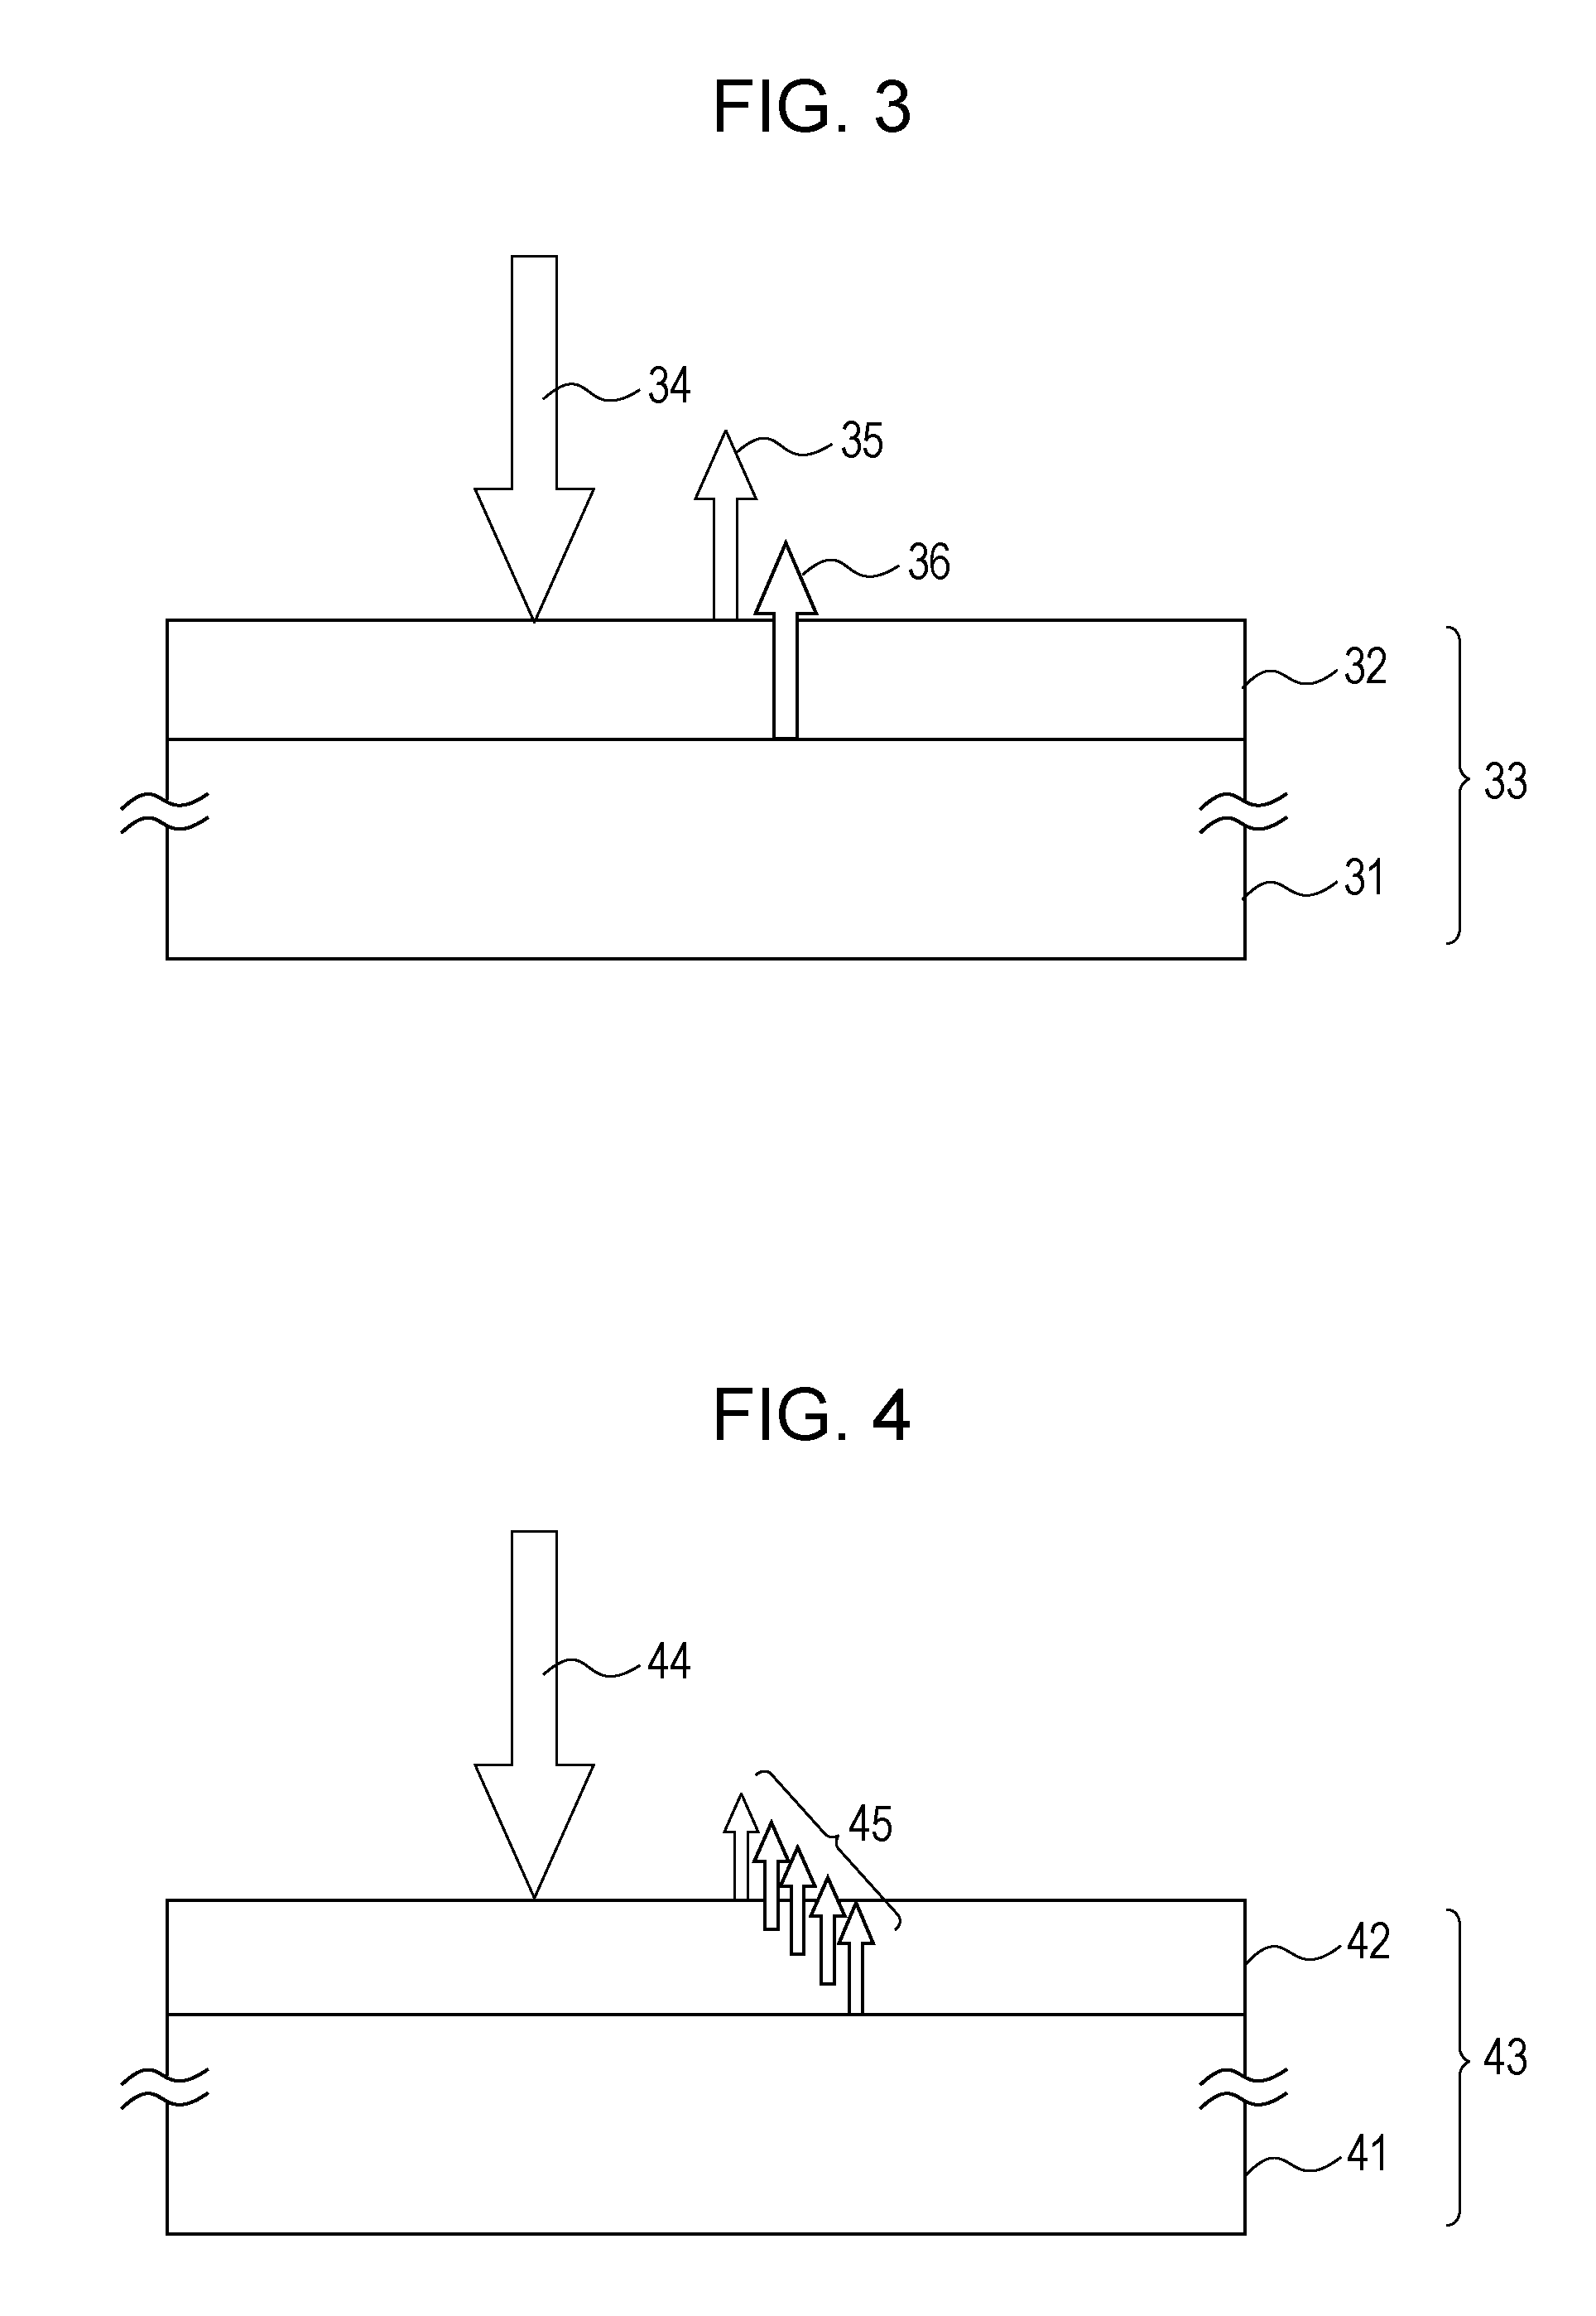 Optical element, optical system including the optical element, and optical apparatus including the optical system